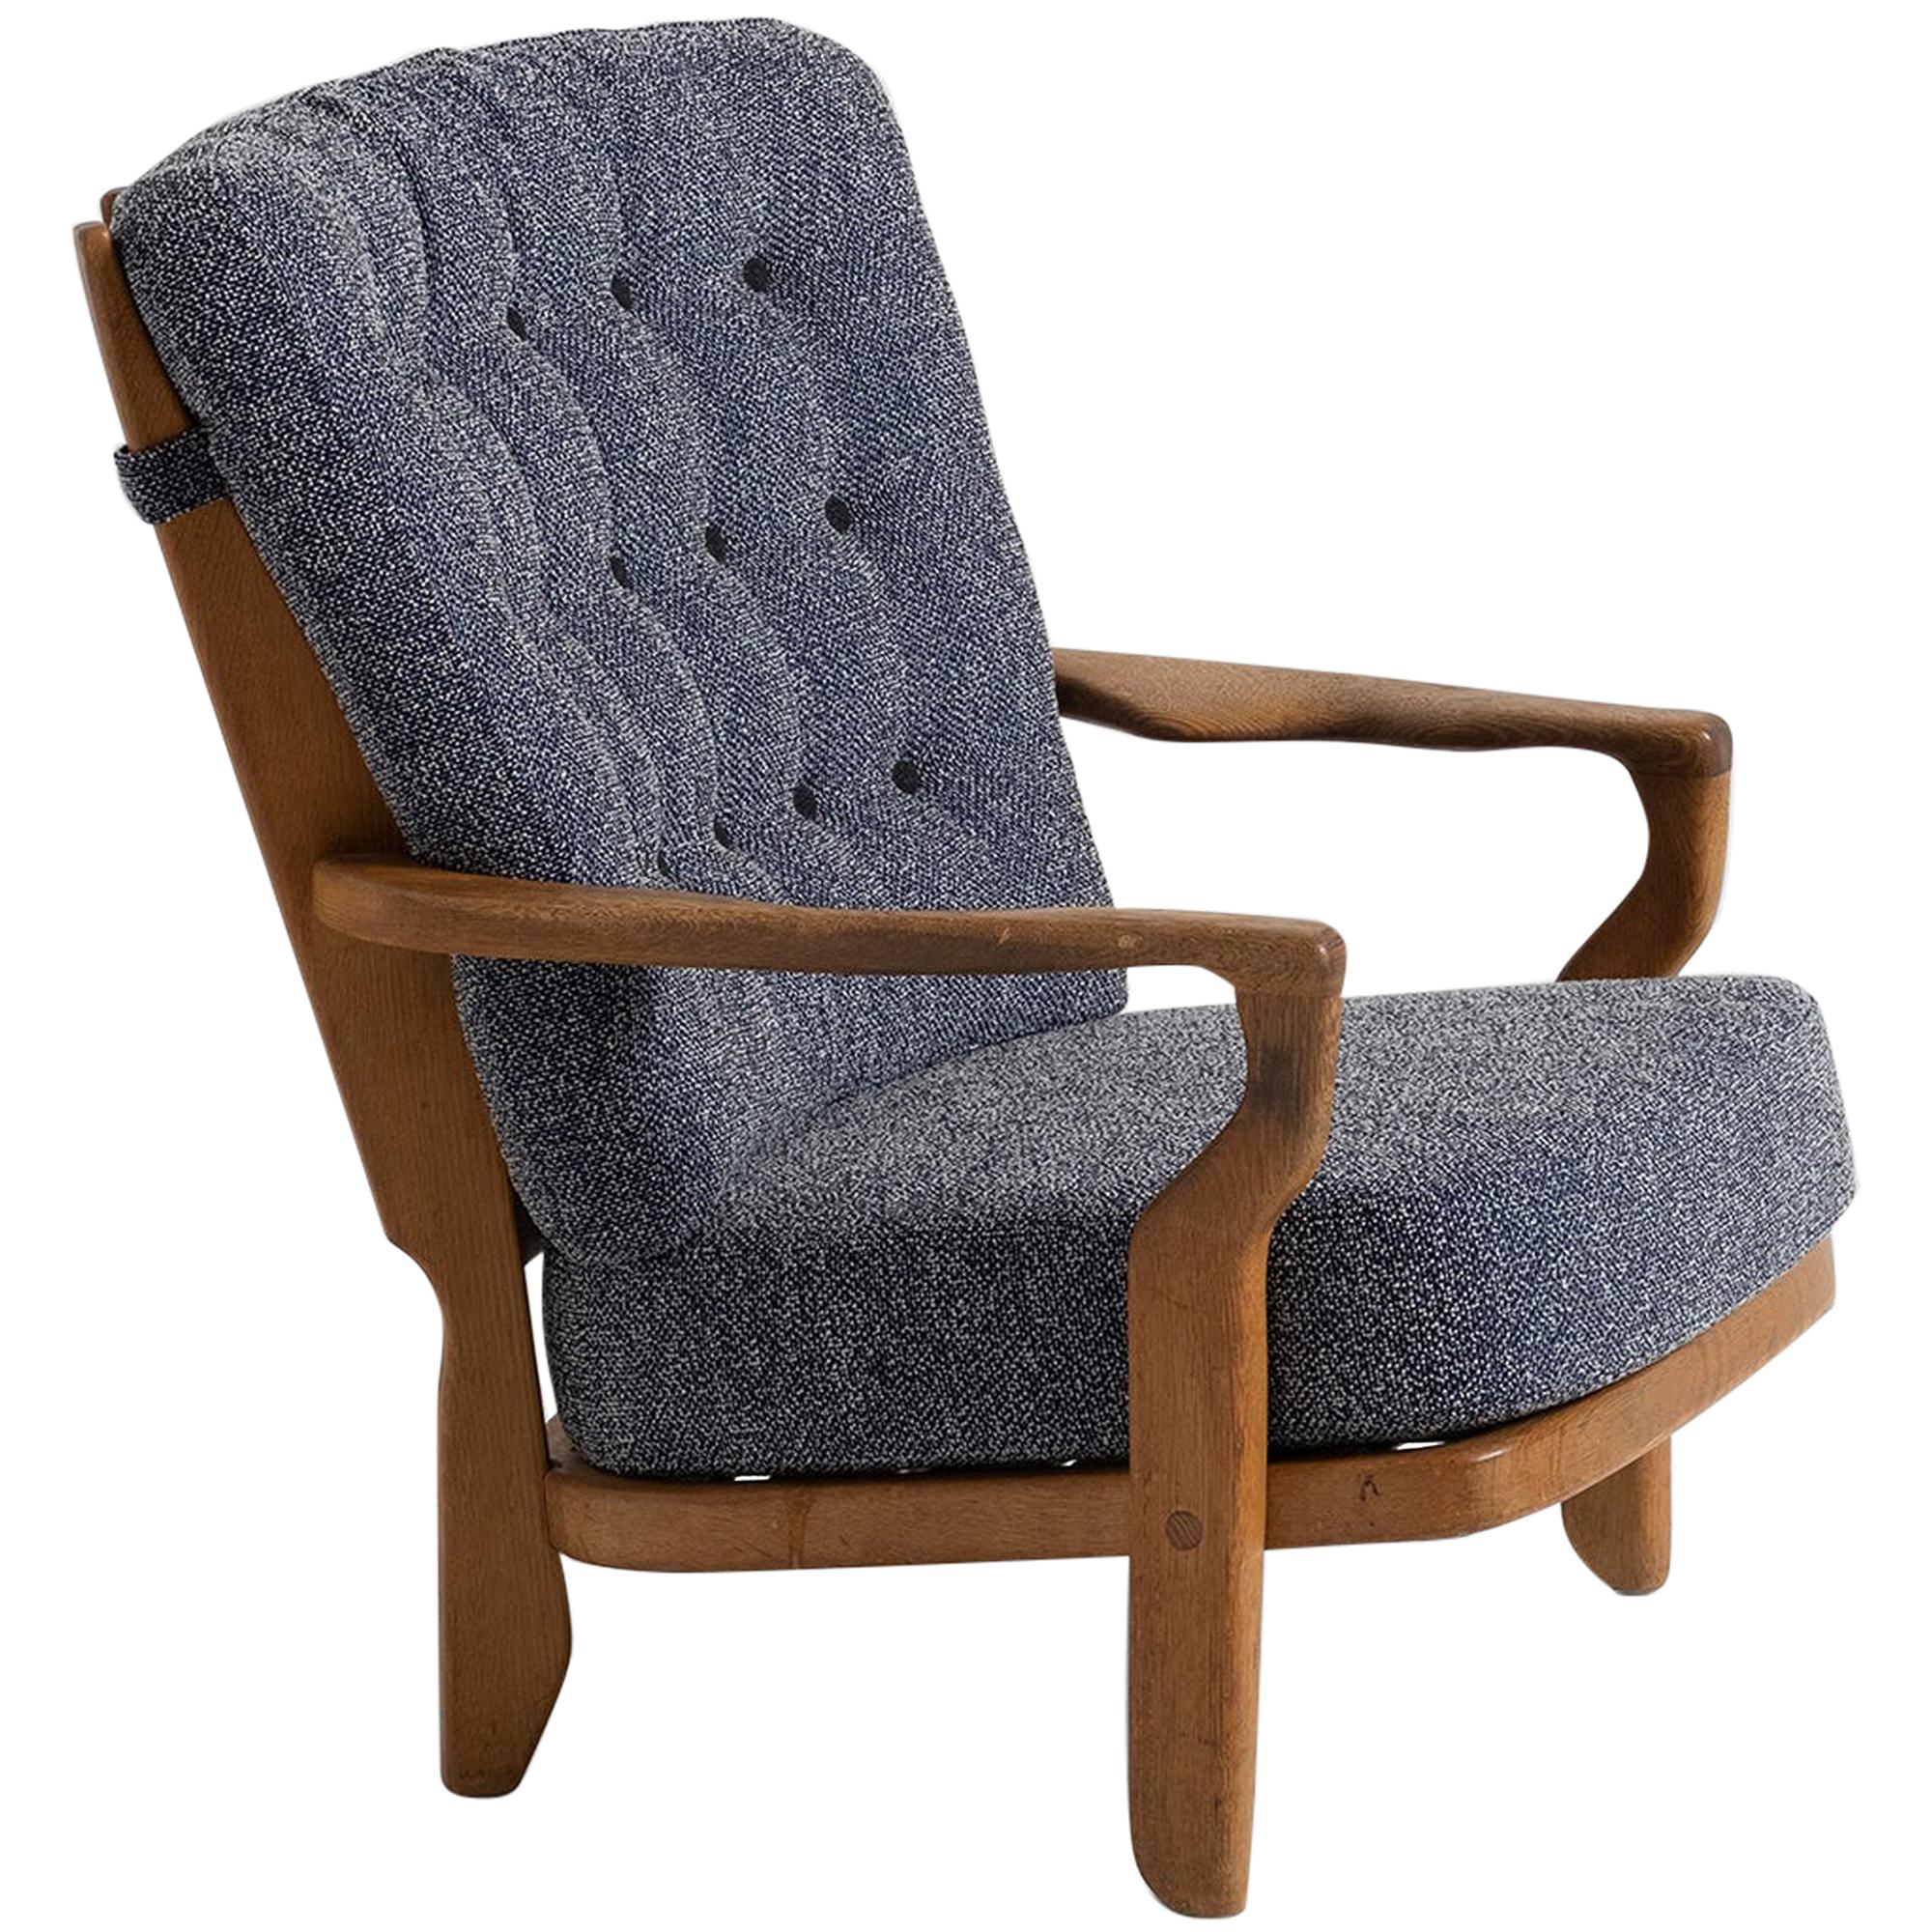 Armchair by Guillerme & Chambron, France, circa 1950